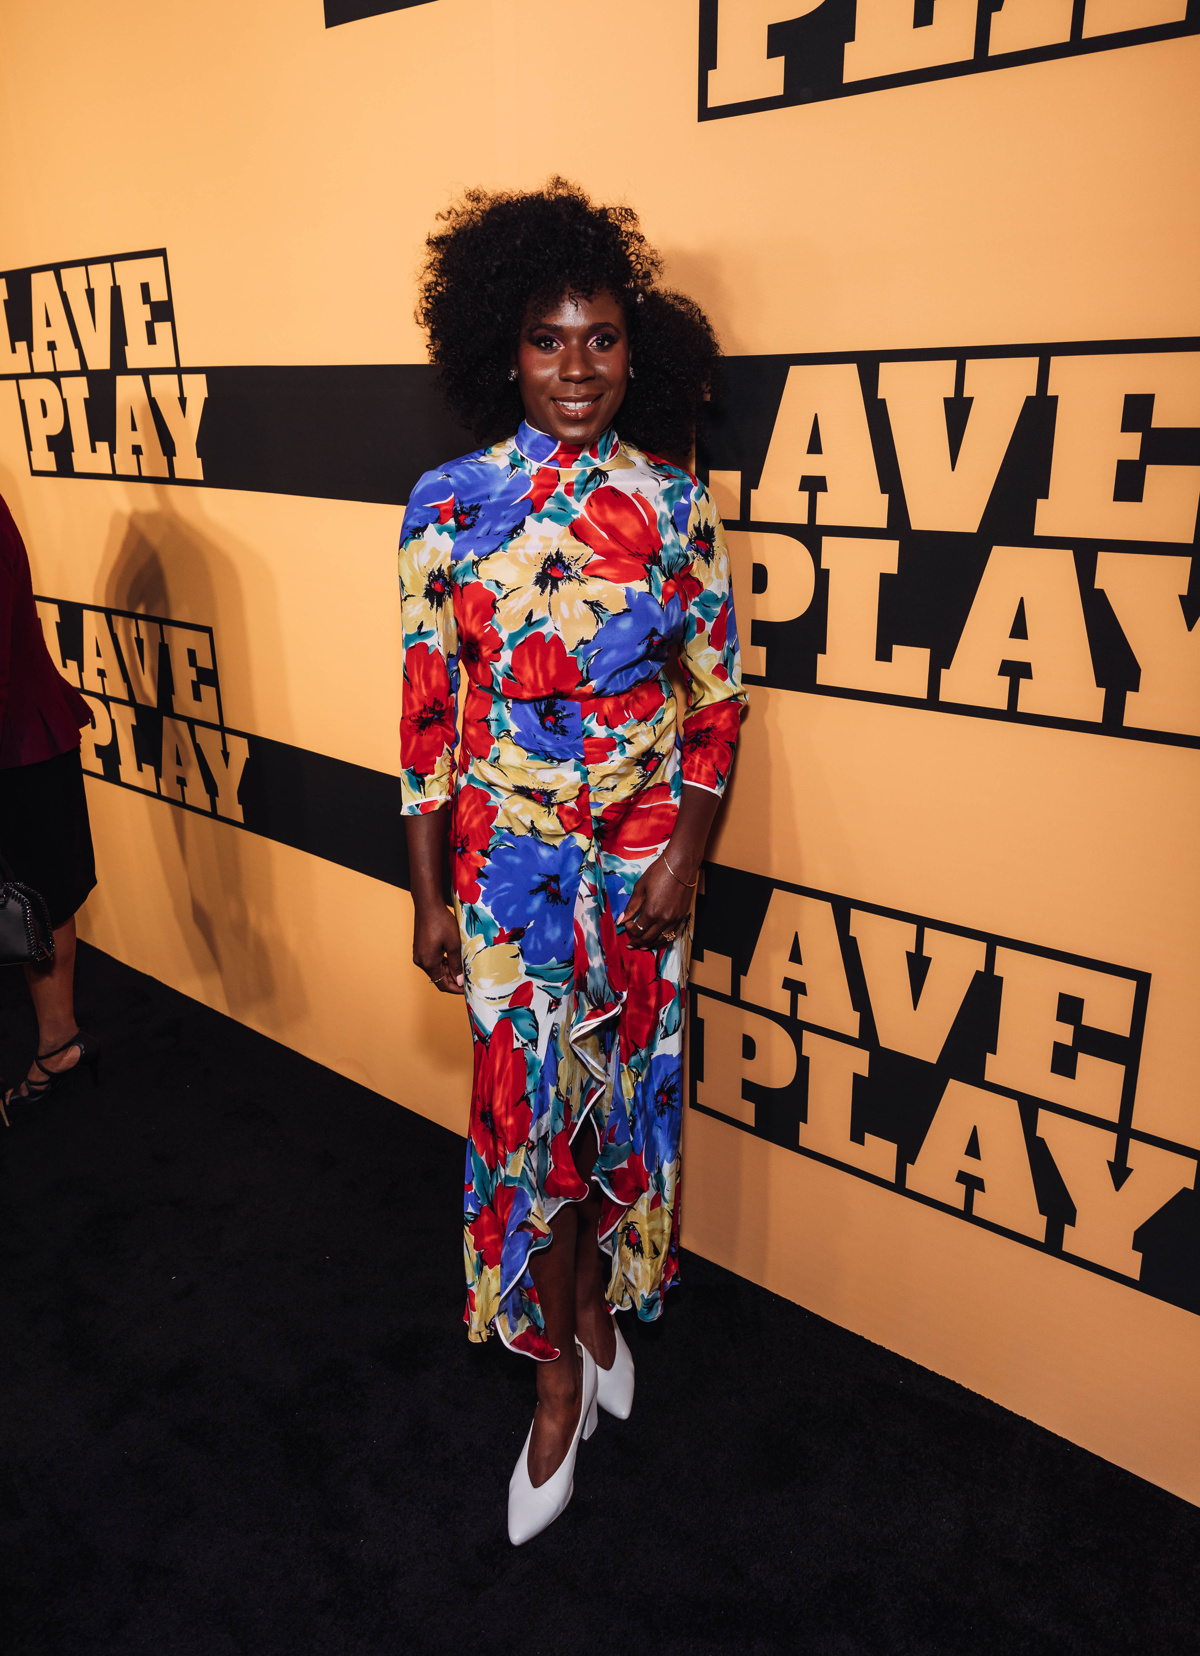 See The Stars Of Slave Play And More Celebrate Opening Night On Broadway